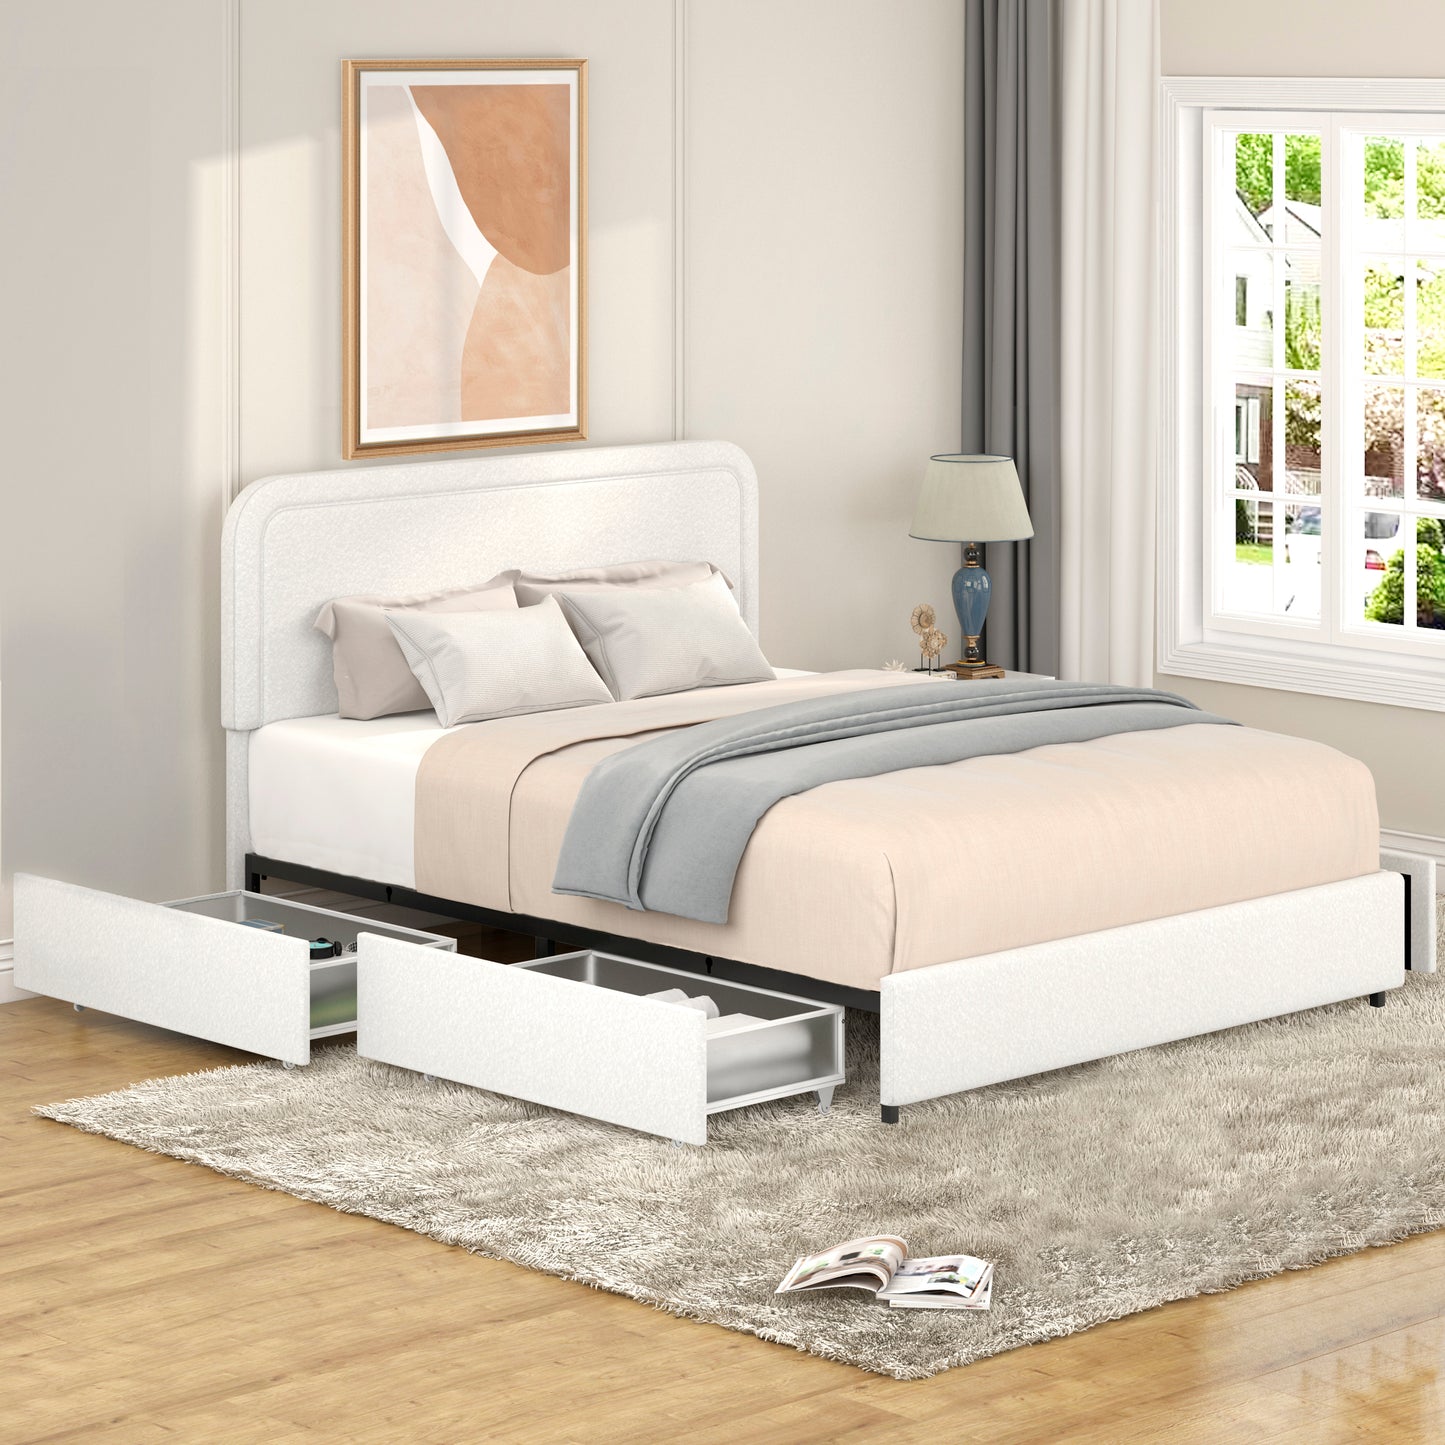 Liv Queen Size Ivory Boucle Upholstered Platform Bed with Patented 4 Drawers Storage, Curved Stitched Tufted Headboard, Wooden Slat Mattress Support, No Box Spring Needed